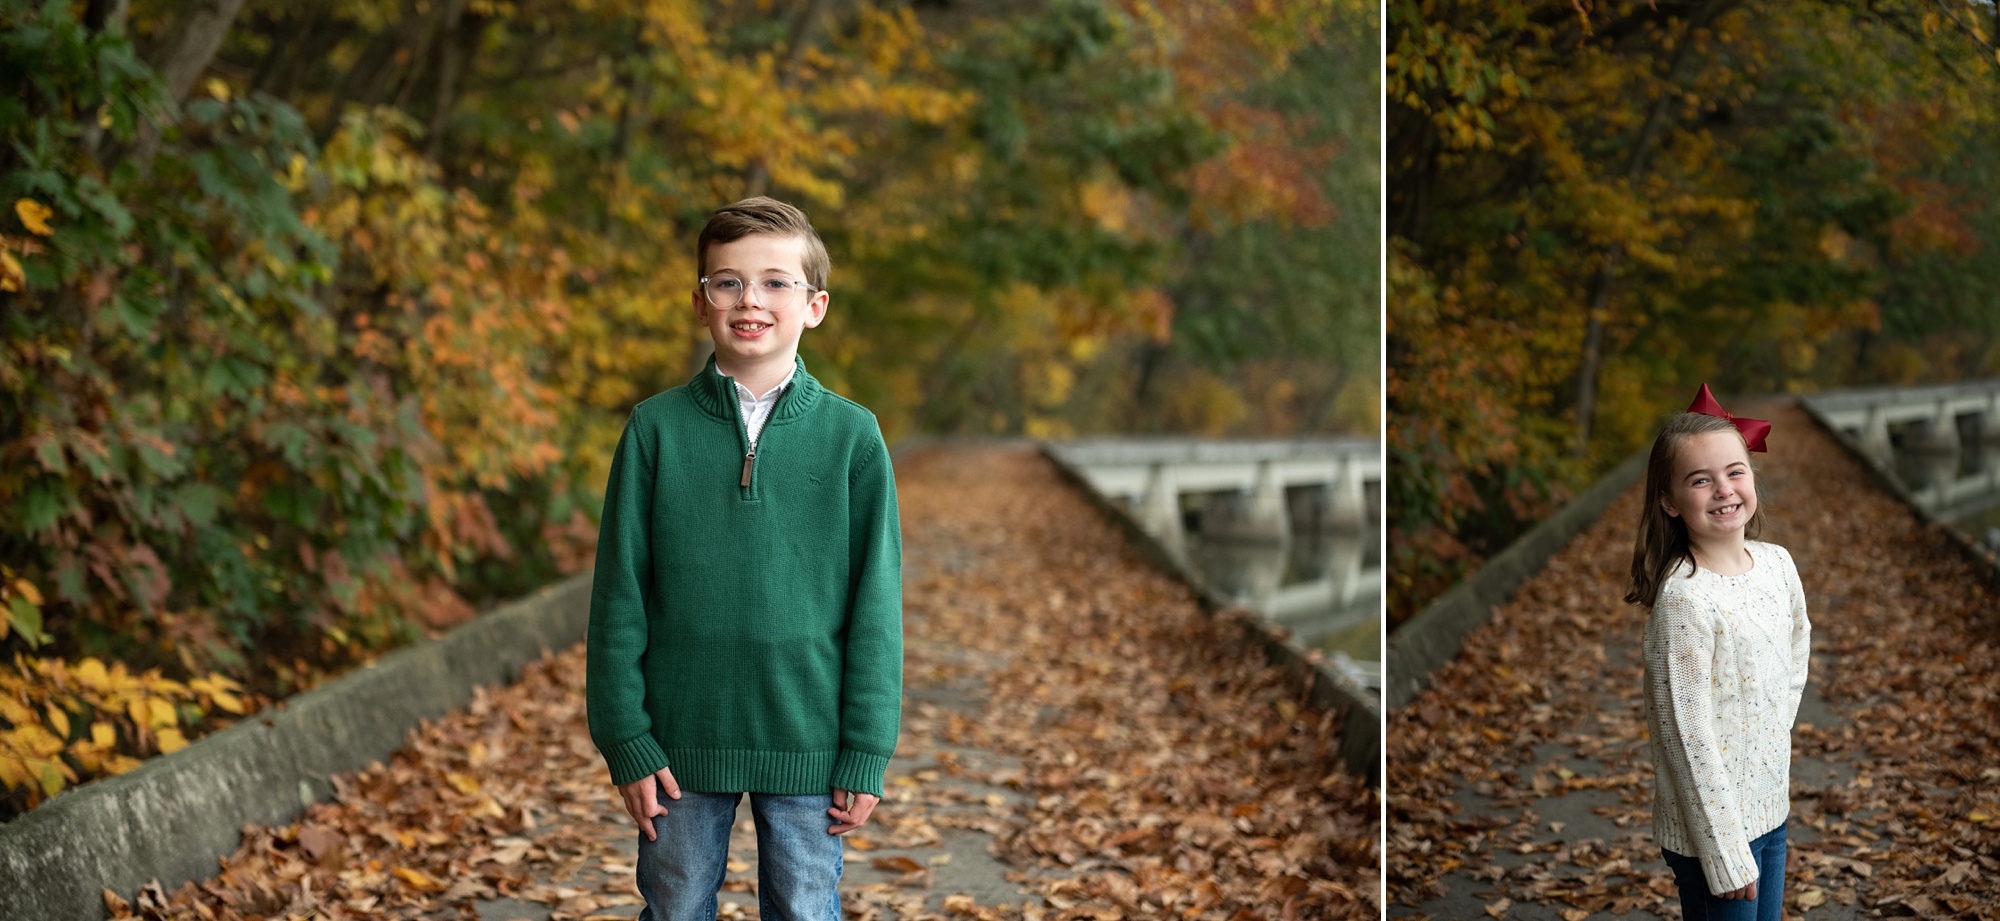 Lake Linganore portraits of young children